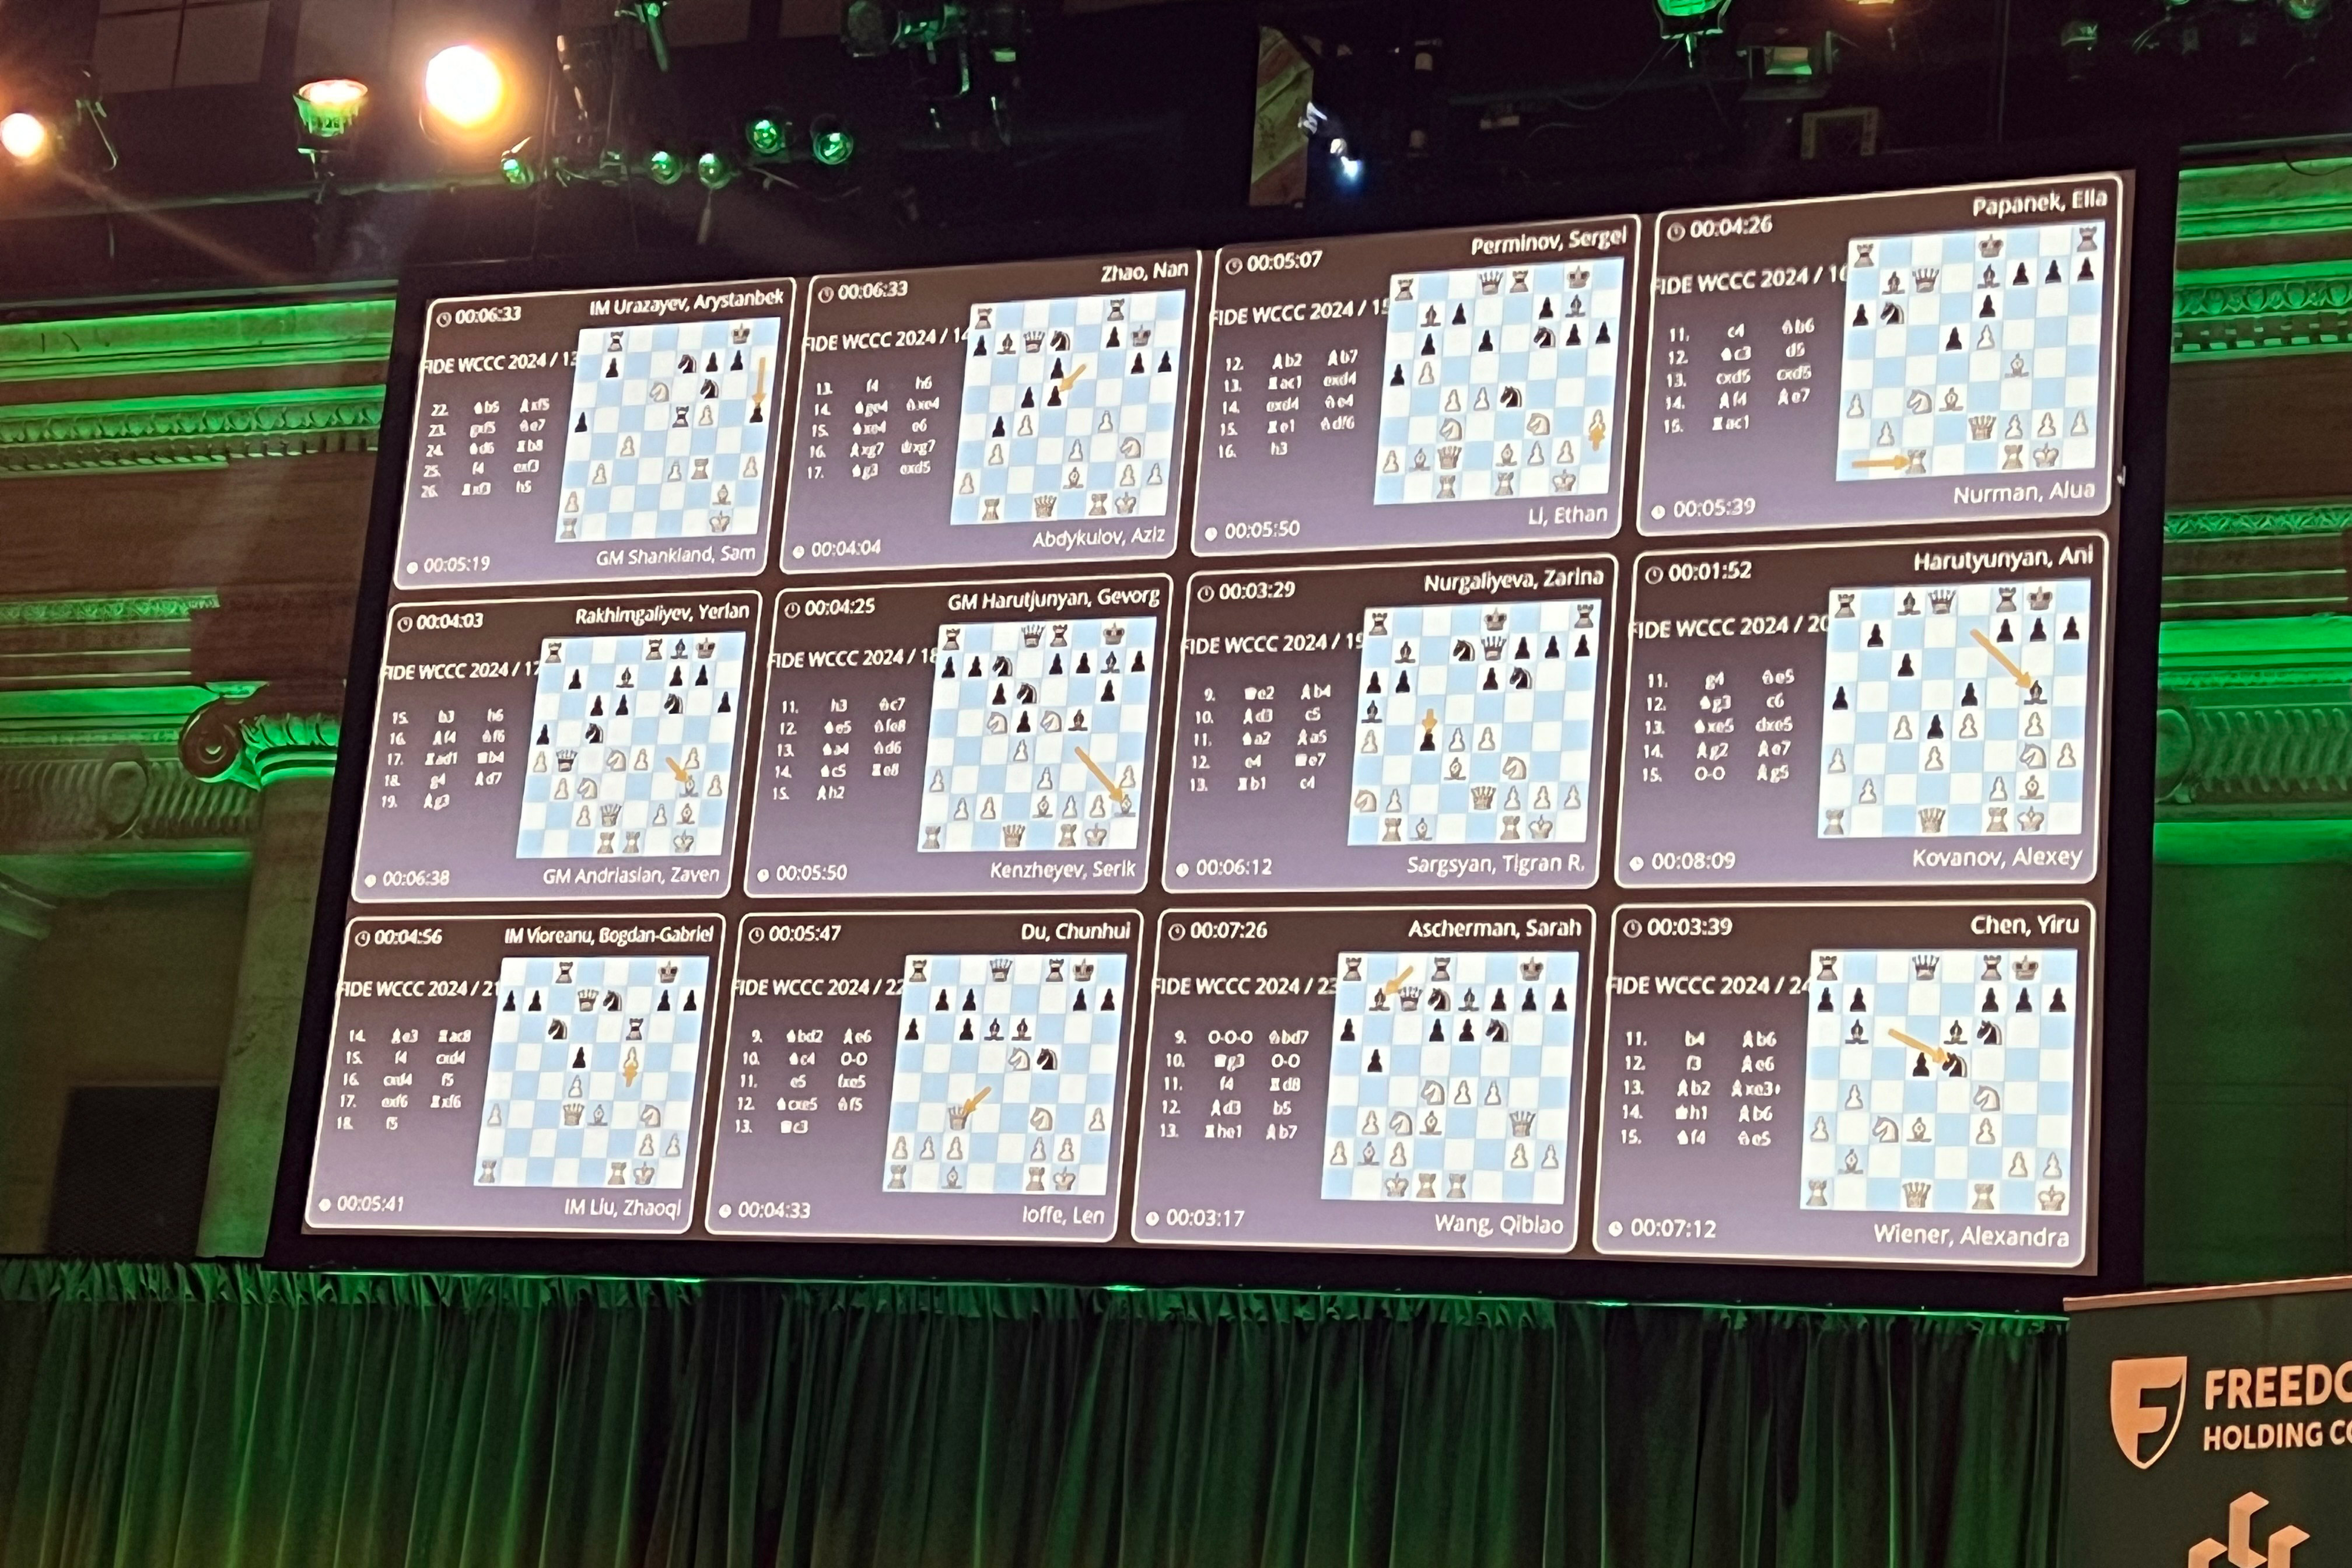 Each player's move was projected on a large screen mounted above the stage.